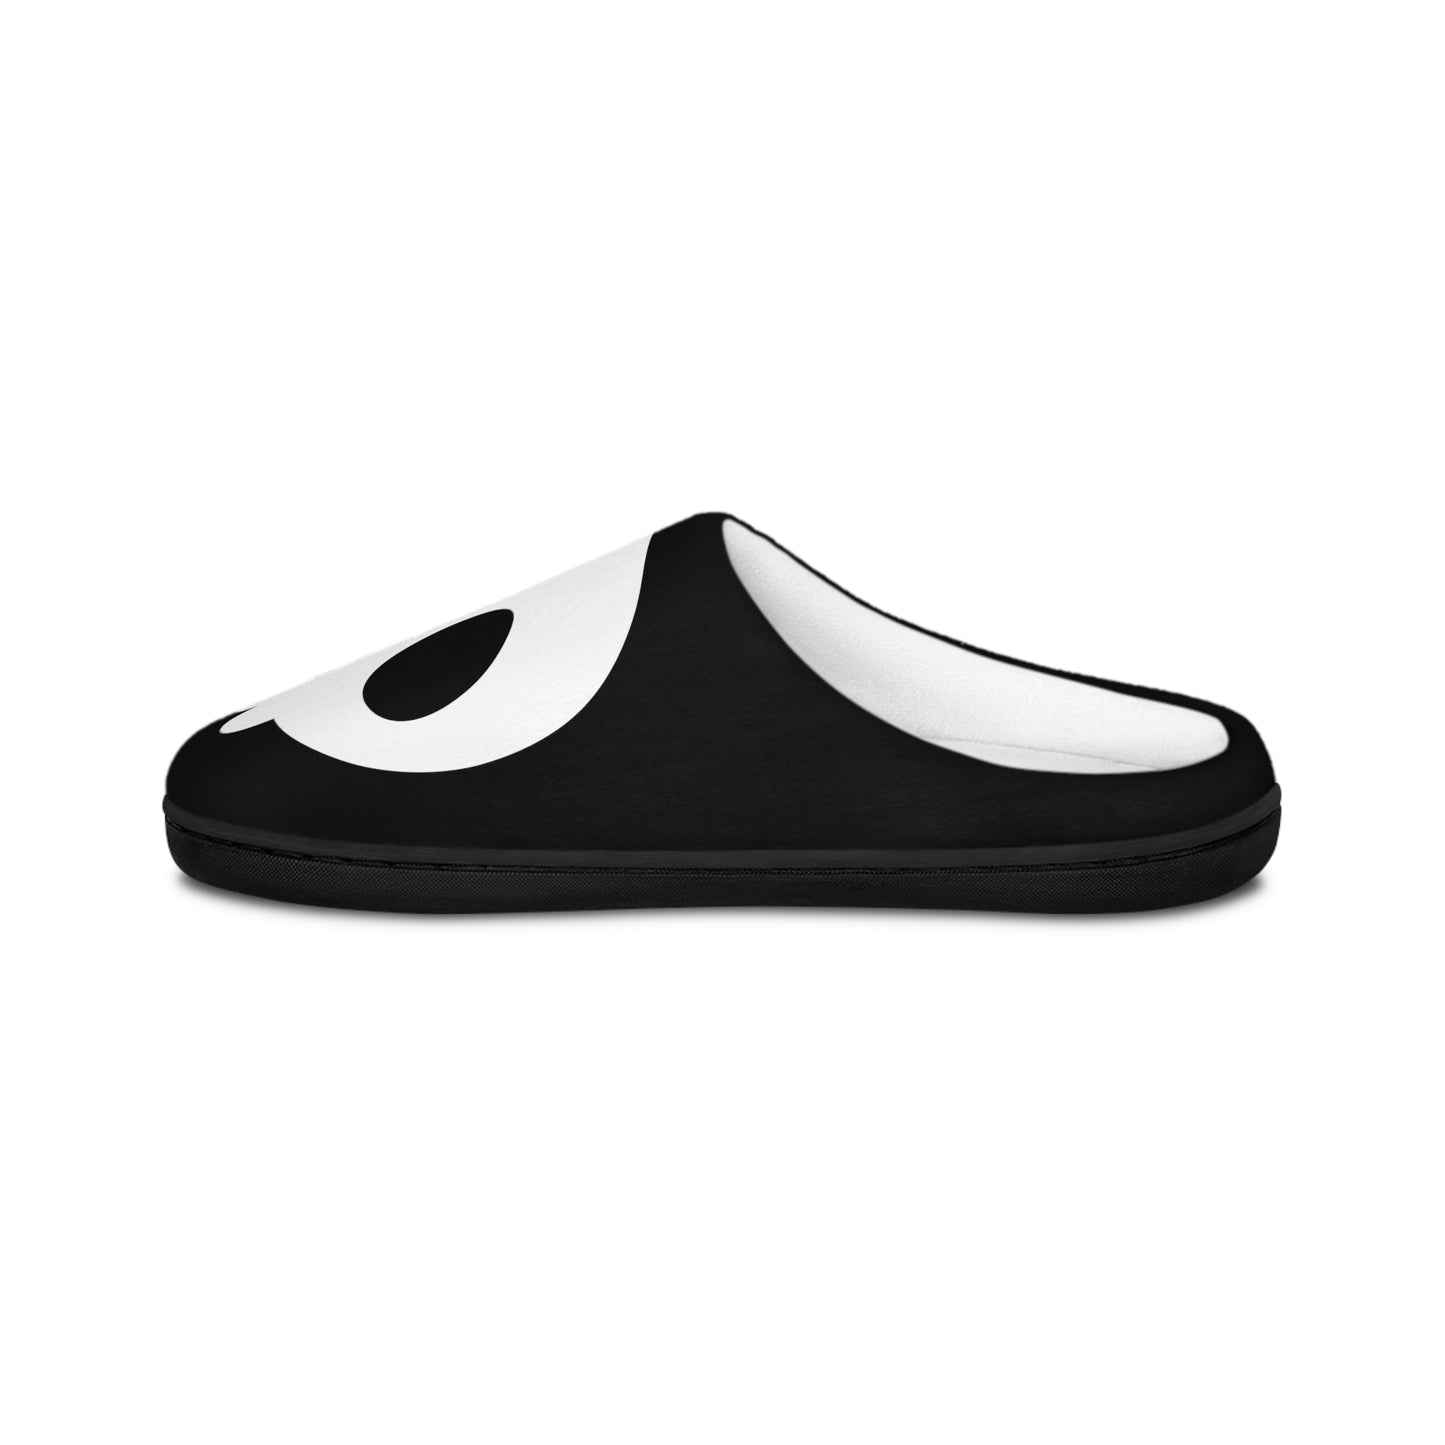 Spooky Witch Skull - Women's Indoor Slippers (black & white)